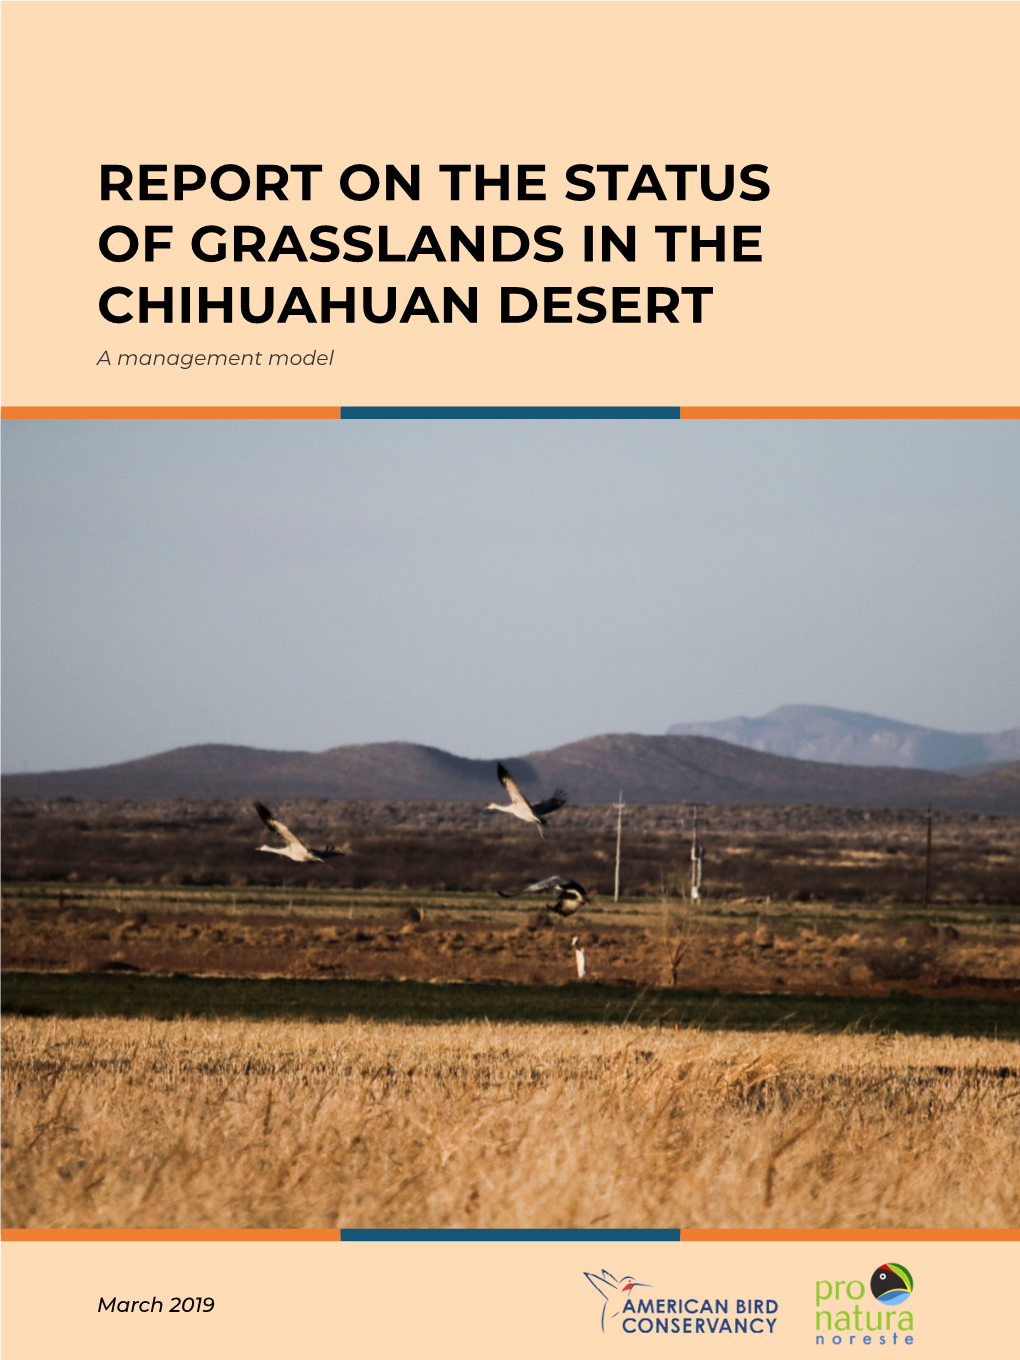 REPORT on the STATUS of GRASSLANDS in the CHIHUAHUAN DESERT a Management Model